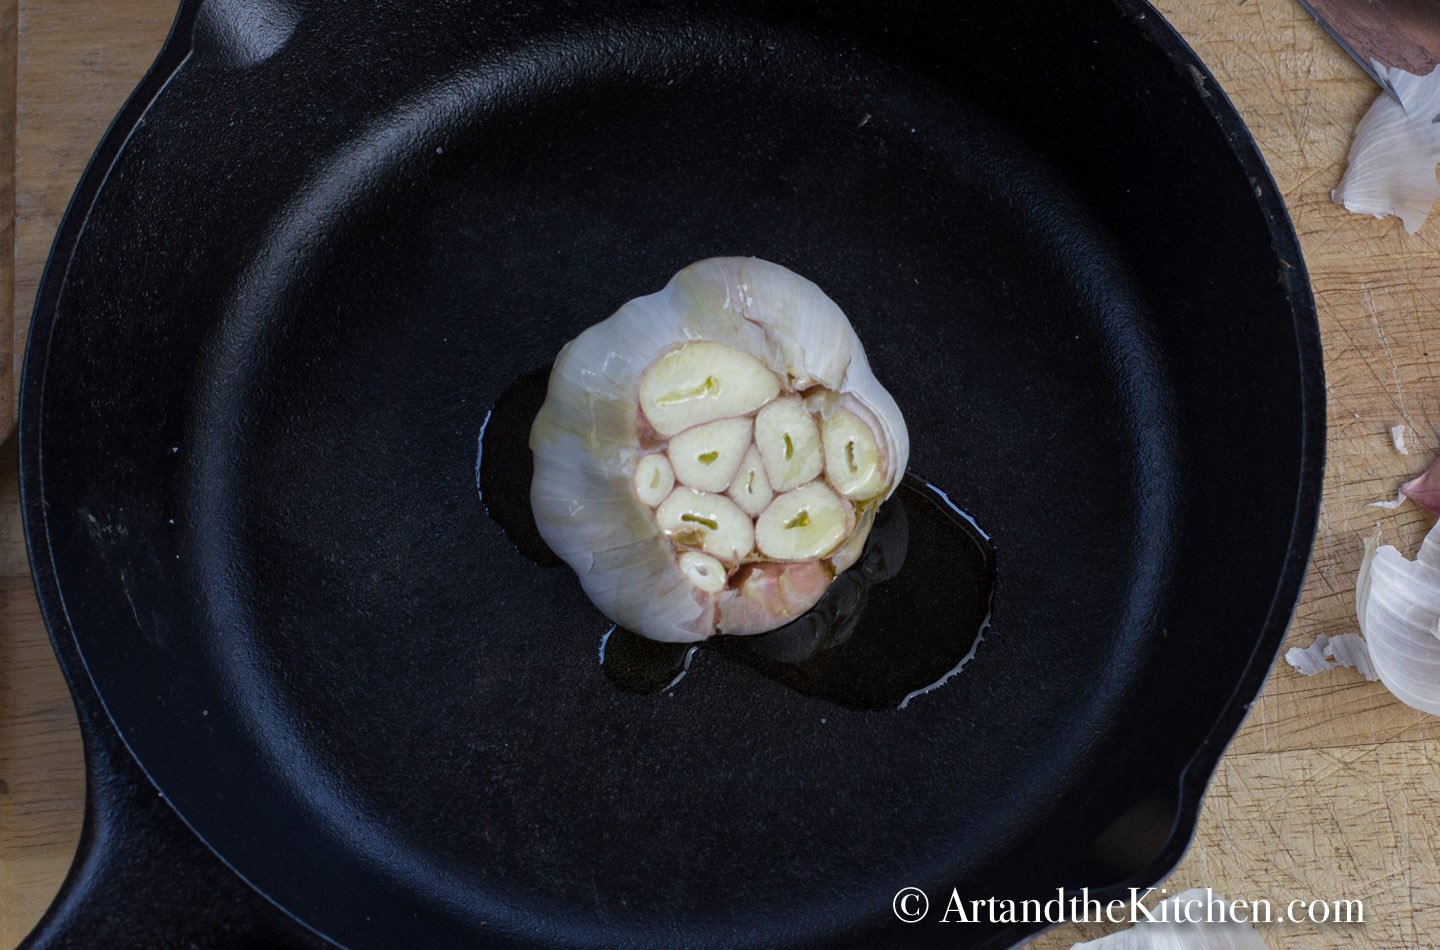 Head of garlic with the top sliced off drizzled with olive oil in a cast iron pan.